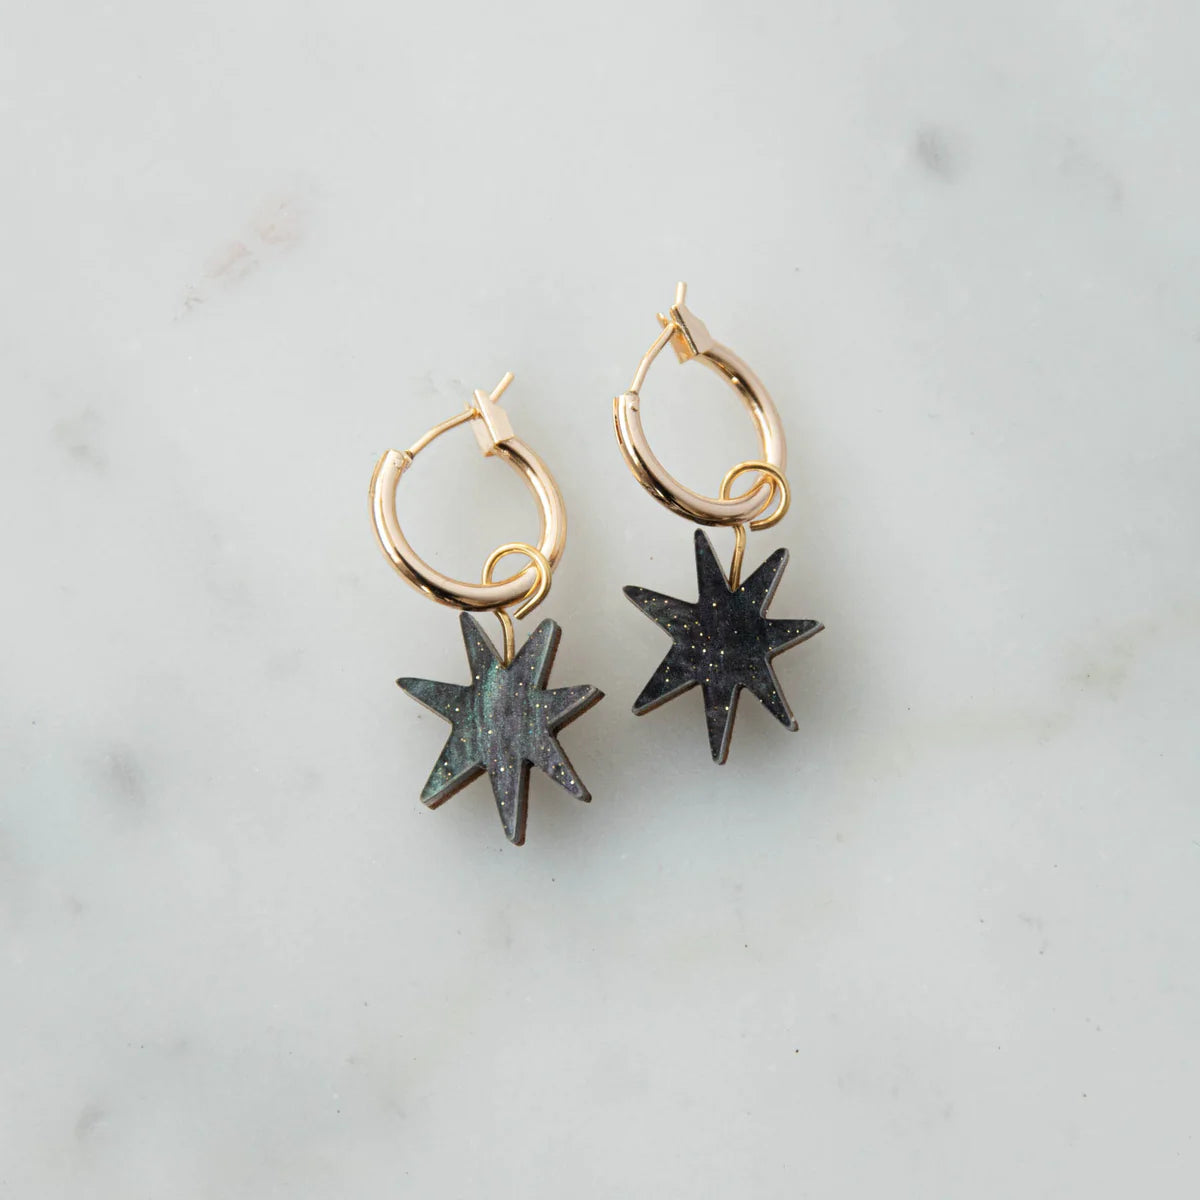 Hand drawn Star Hoops in smoke black - The Bristol Artisan Handmade Sustainable Gifts and Homewares.